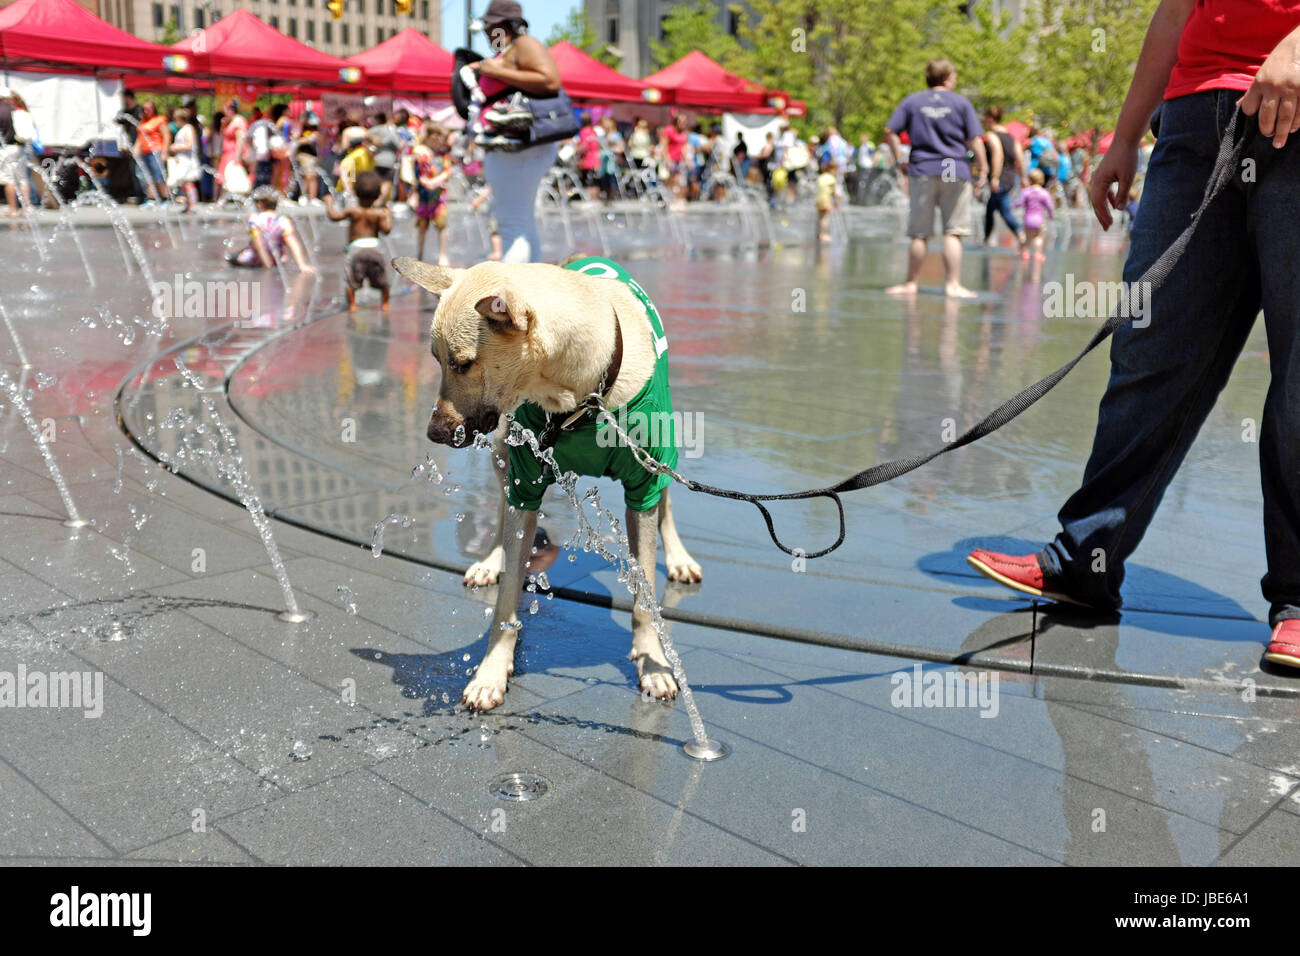 Dog having fun with the water fountains on a warm summer day in downtown Cleveland, Ohio, USA. Stock Photo